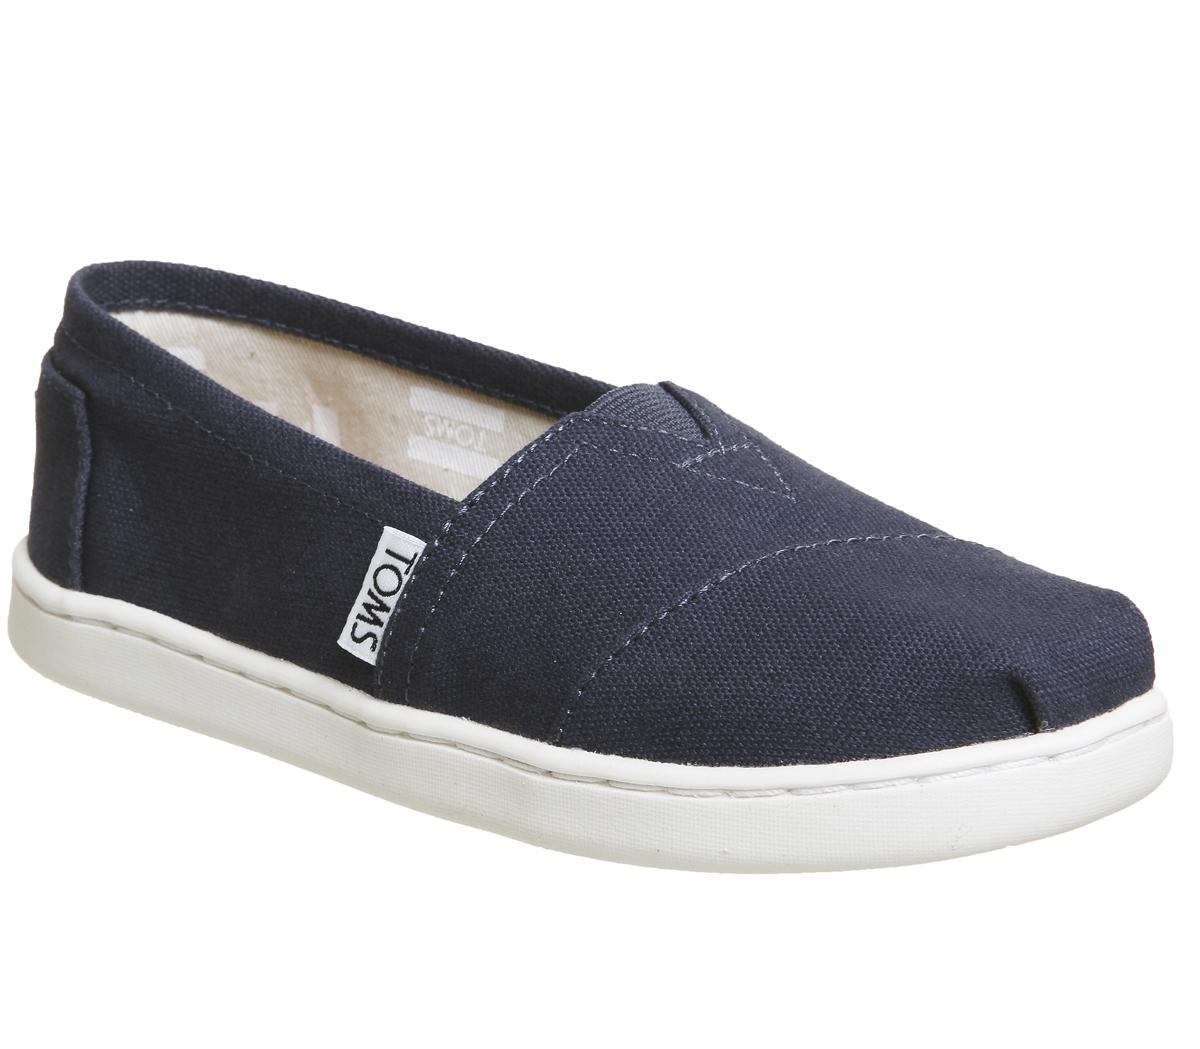 Toms Youth Classics Navy White - Unisex